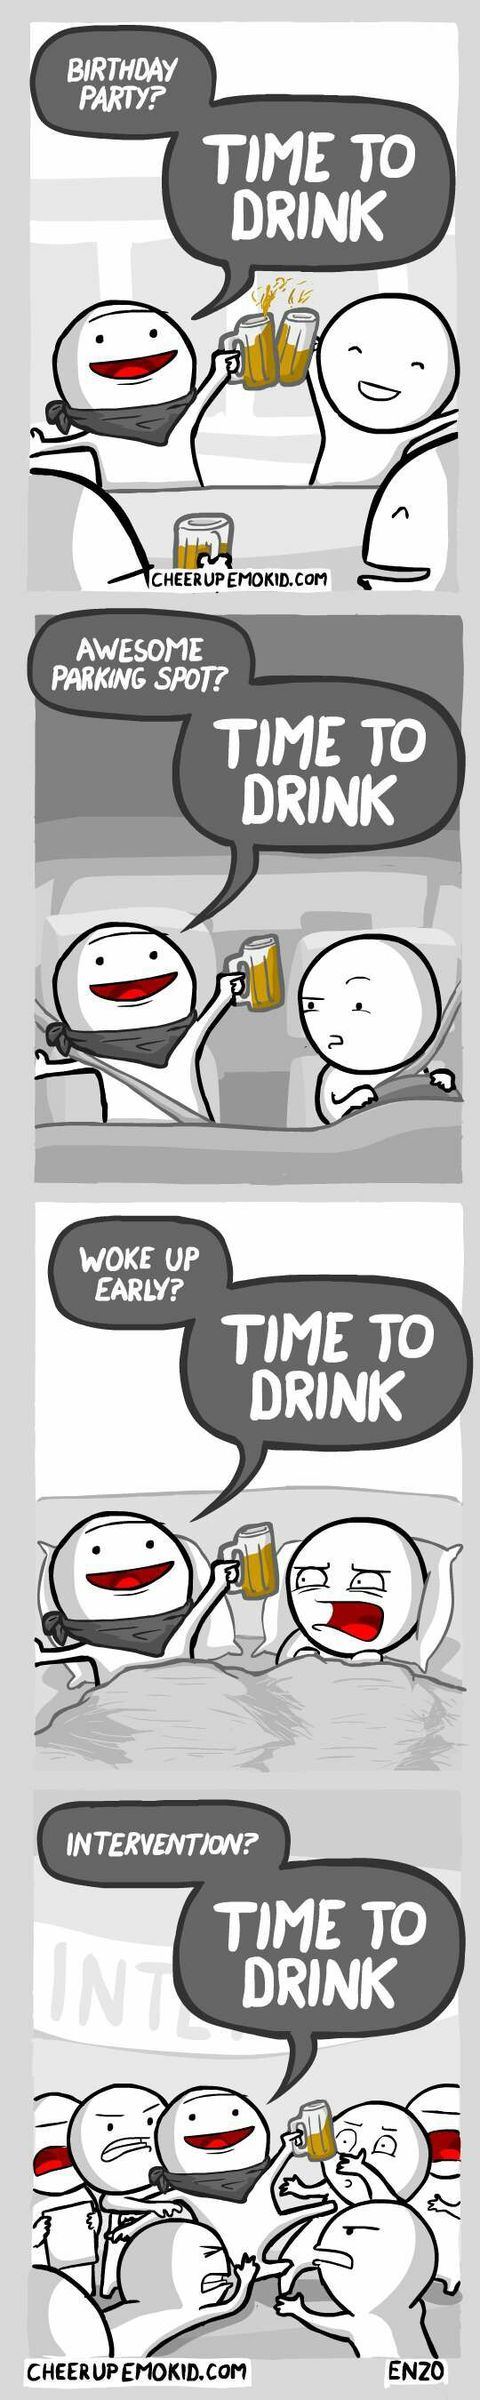 it's always time to drink - meme